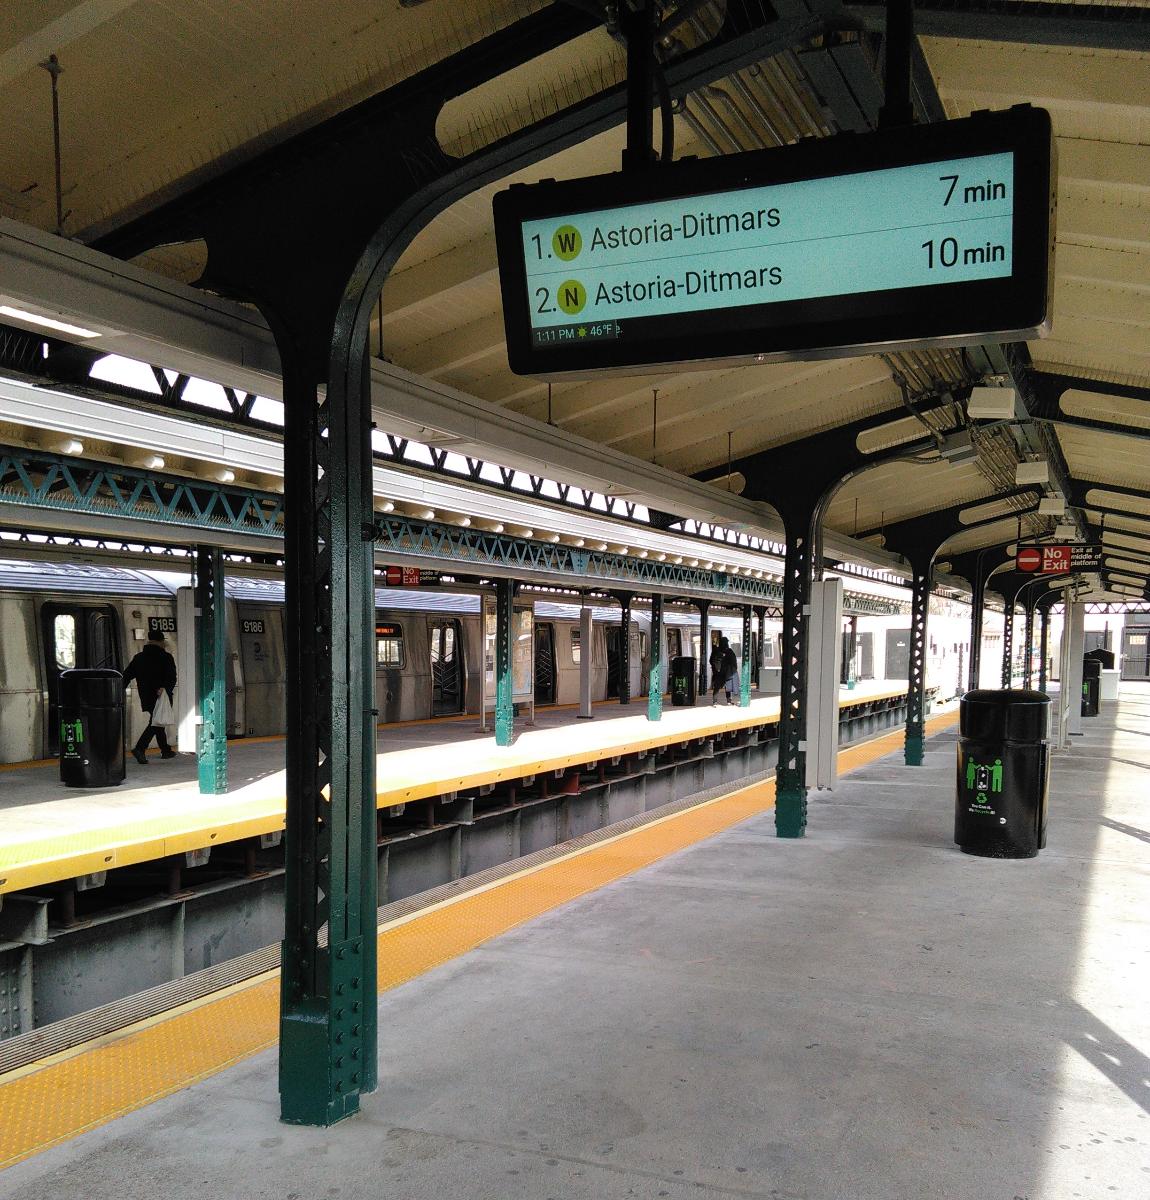 Astoria Boulevard Subway The platforms after the 2019 renovation. The MTA reopened the station on Wednesday, Dec. 18, 2019, after a nine-month closure of the station. During this critical work, the station was closed to service so that crews could demolish the old mezzanine rebuild it to prevent strikes by trucks or other over-height vehicles traveling beneath the elevated station and track structure.
With the newly rebuilt mezzanine completely, Astoria Blvd will remain open as work on the other phase of the work continues. This part of the project includes installation of four new elevators and other accessibility features.